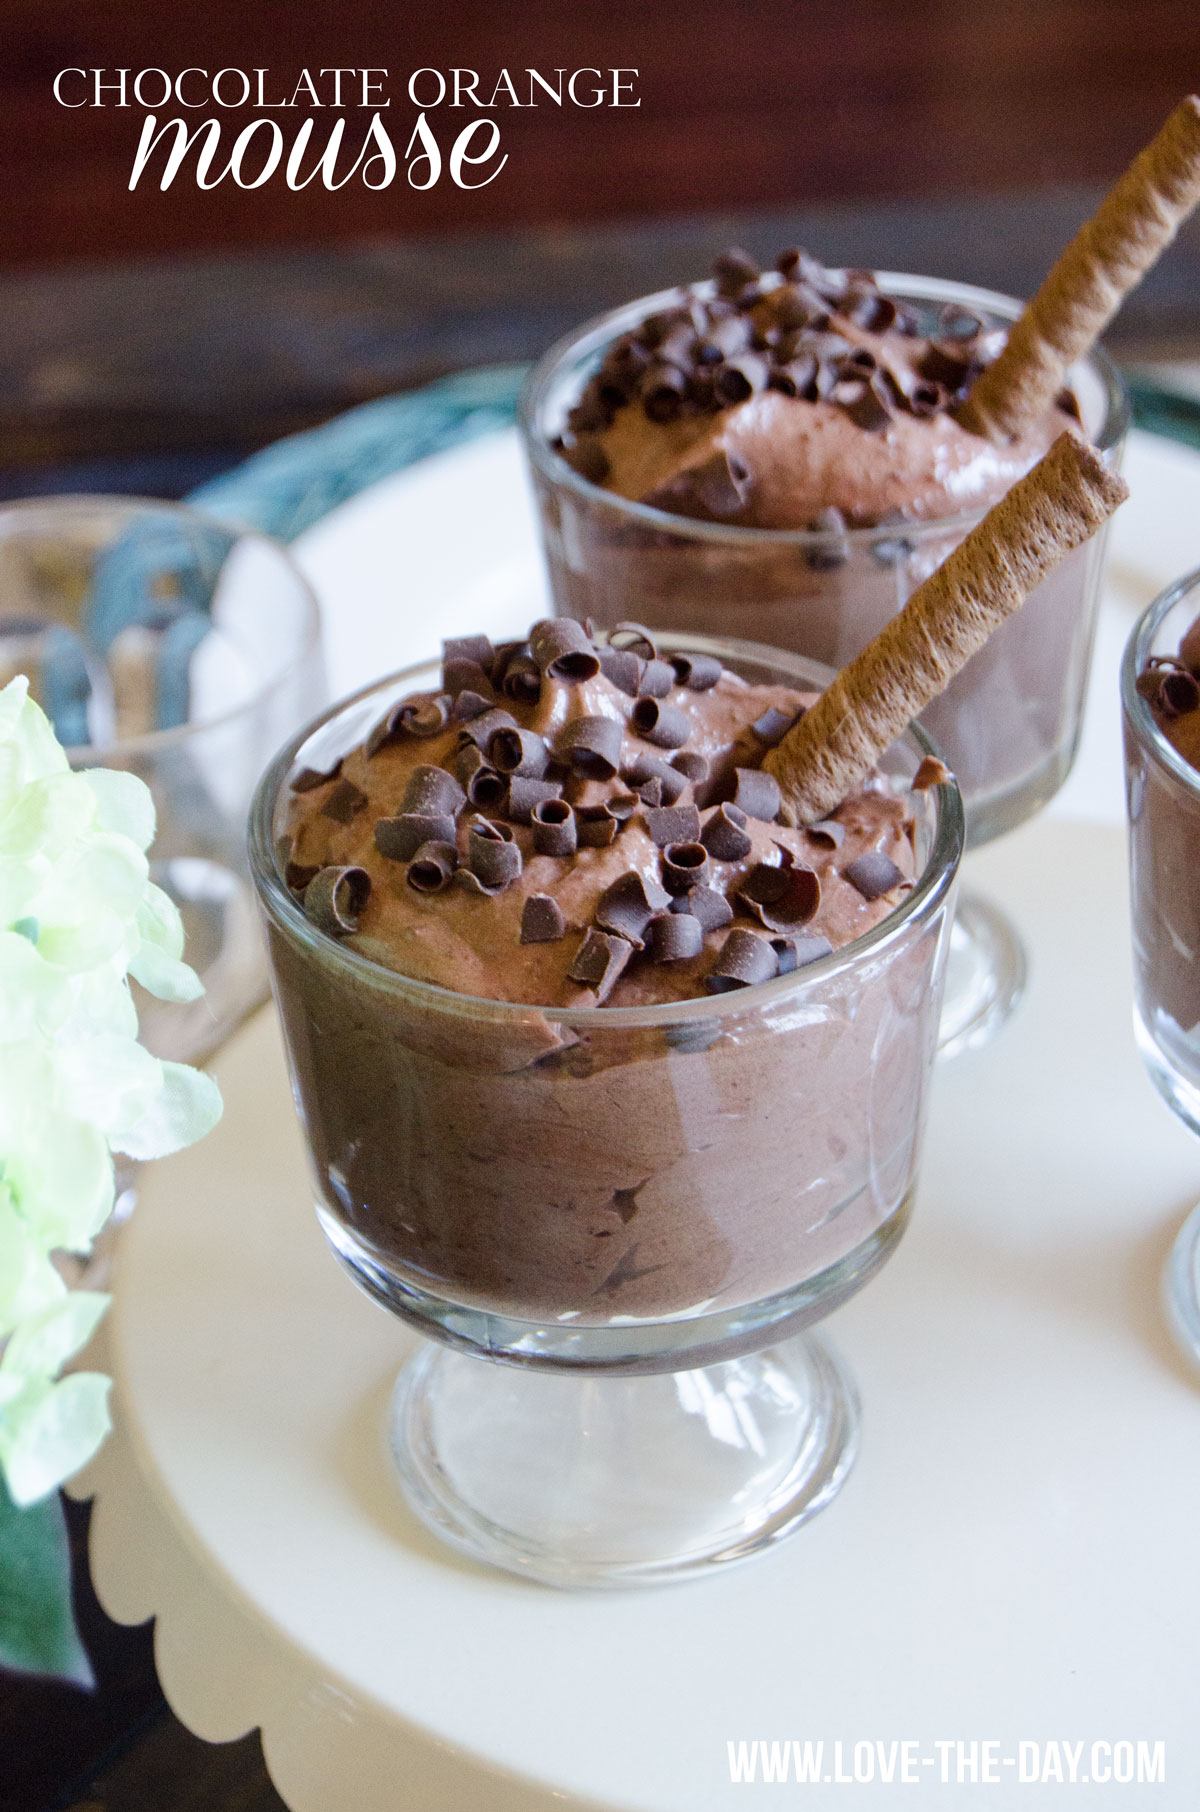 https://love-the-day.com/wp-content/uploads/2015/04/Chocolate-Orange-Mousse3.jpg